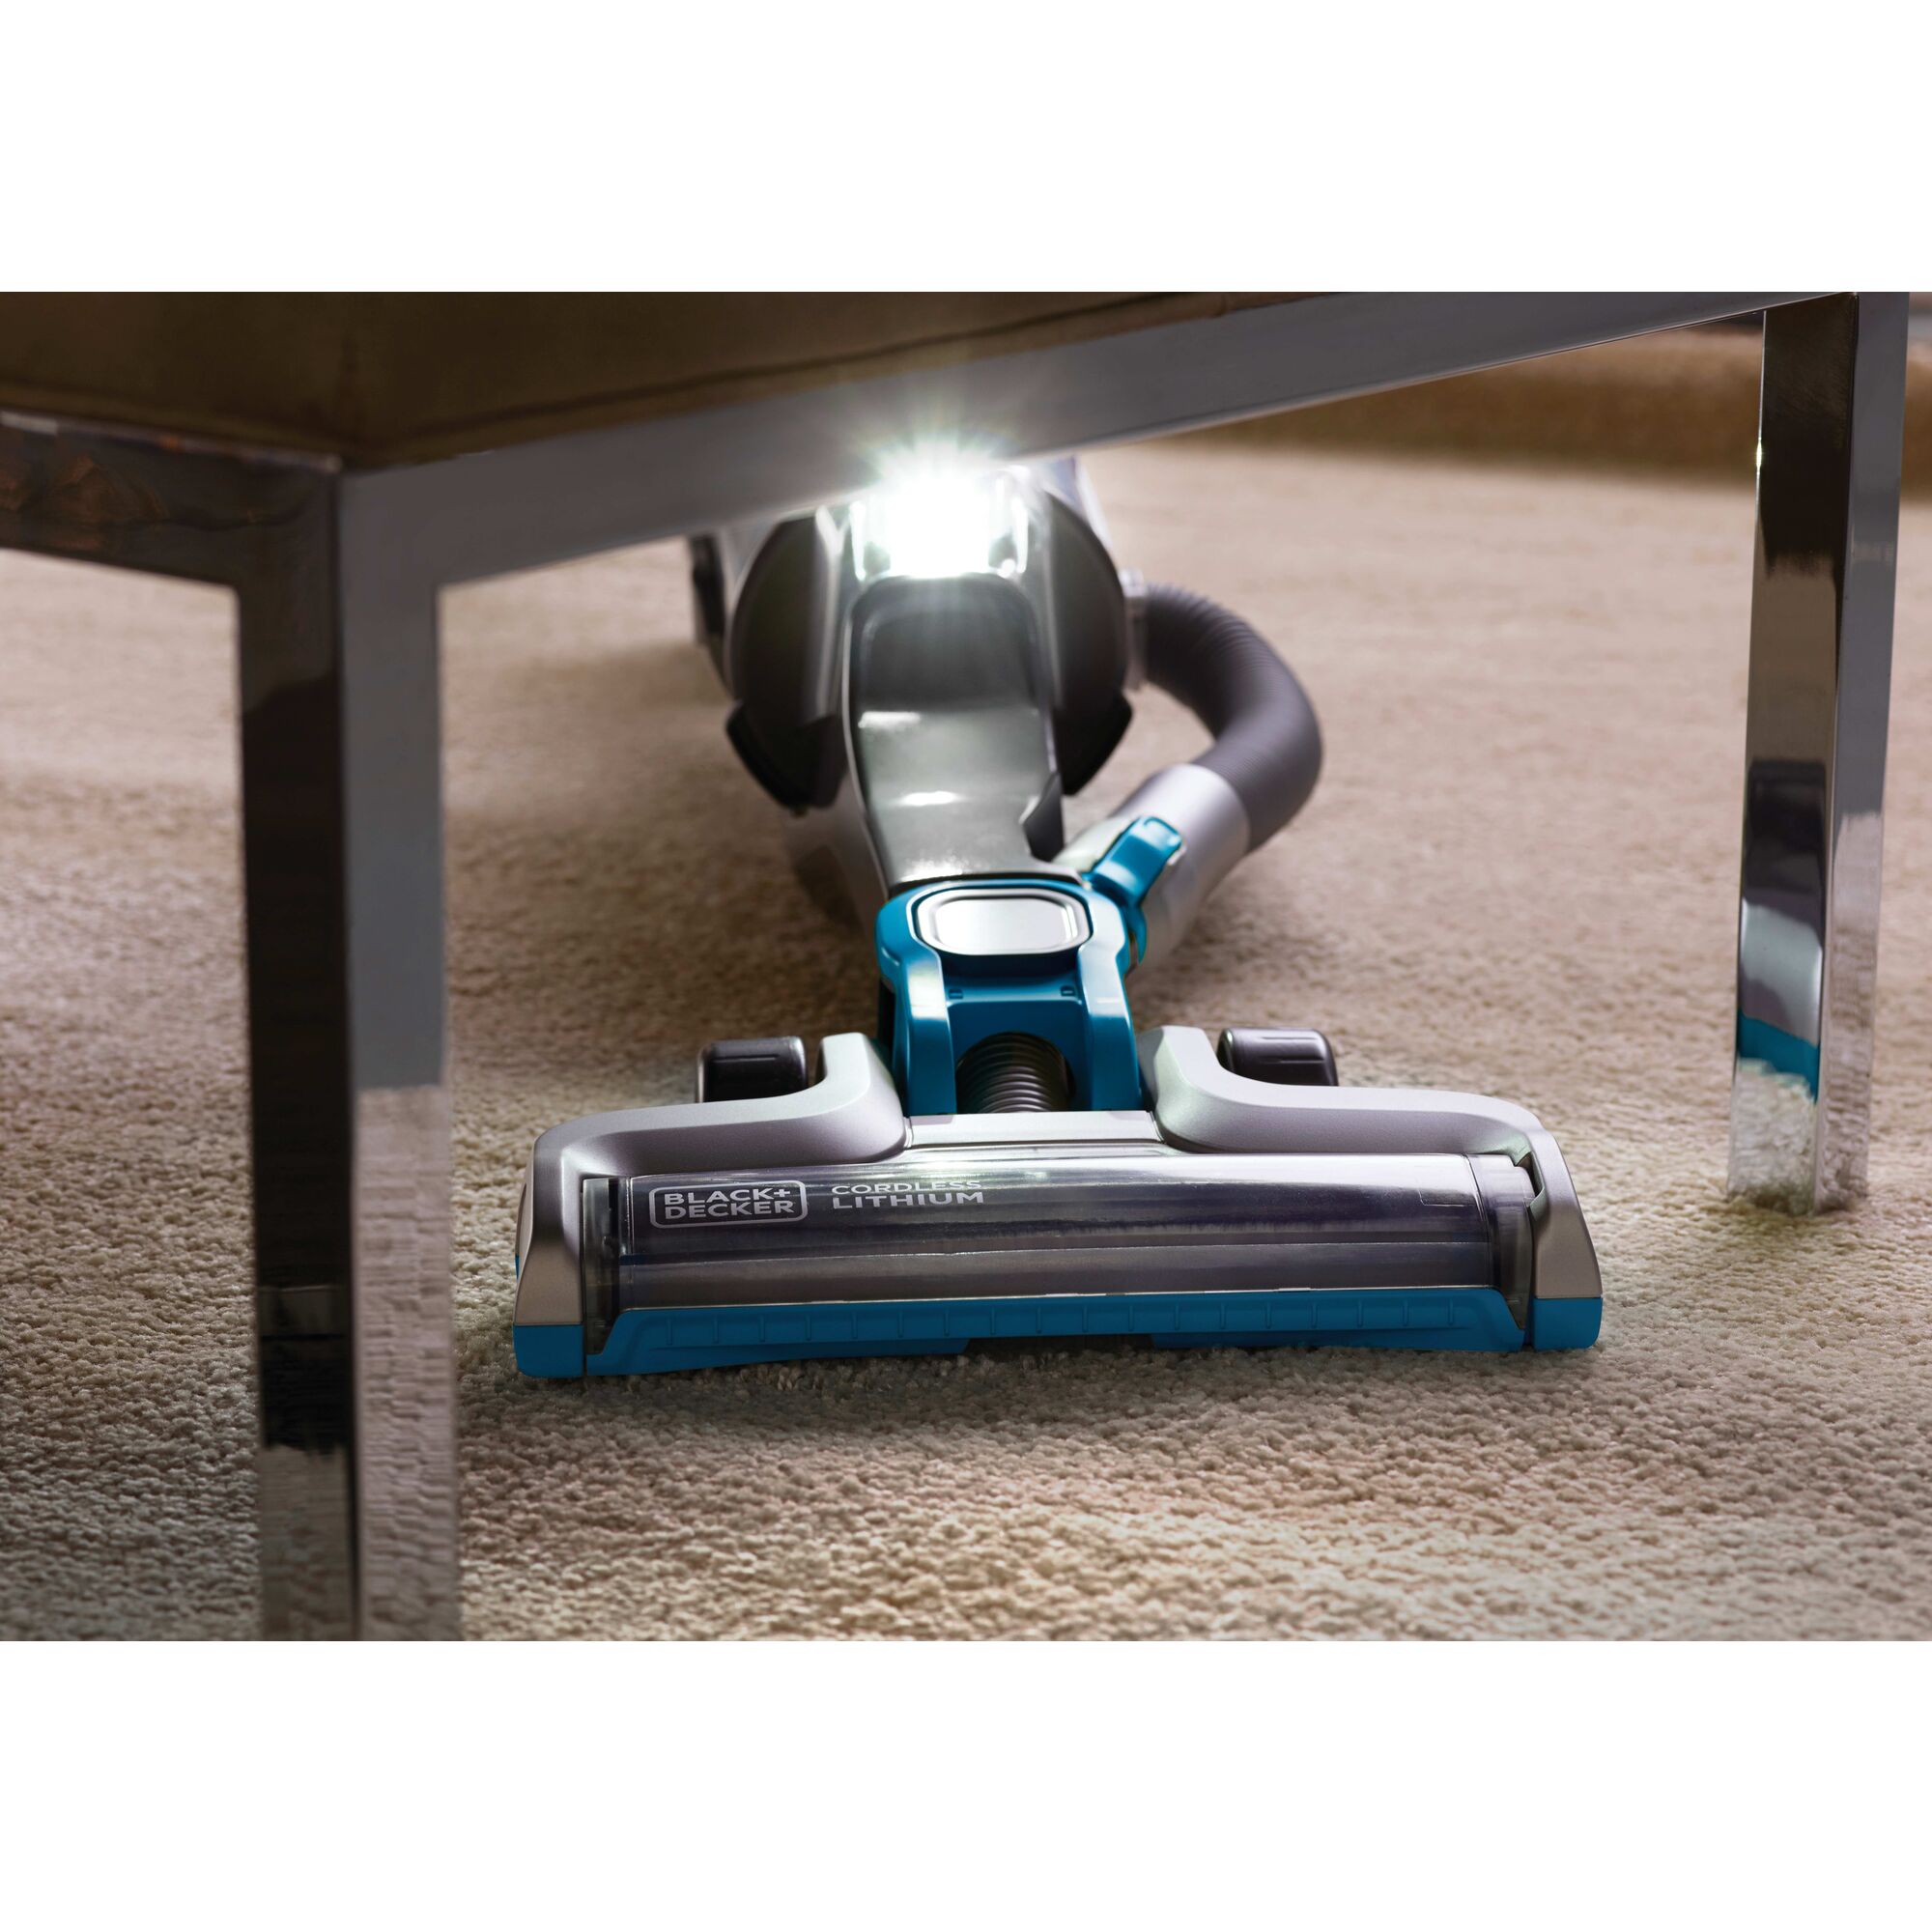 POWERSERIES PRO cordless 2 in 1 vacuum being used by a person to clean carpet.